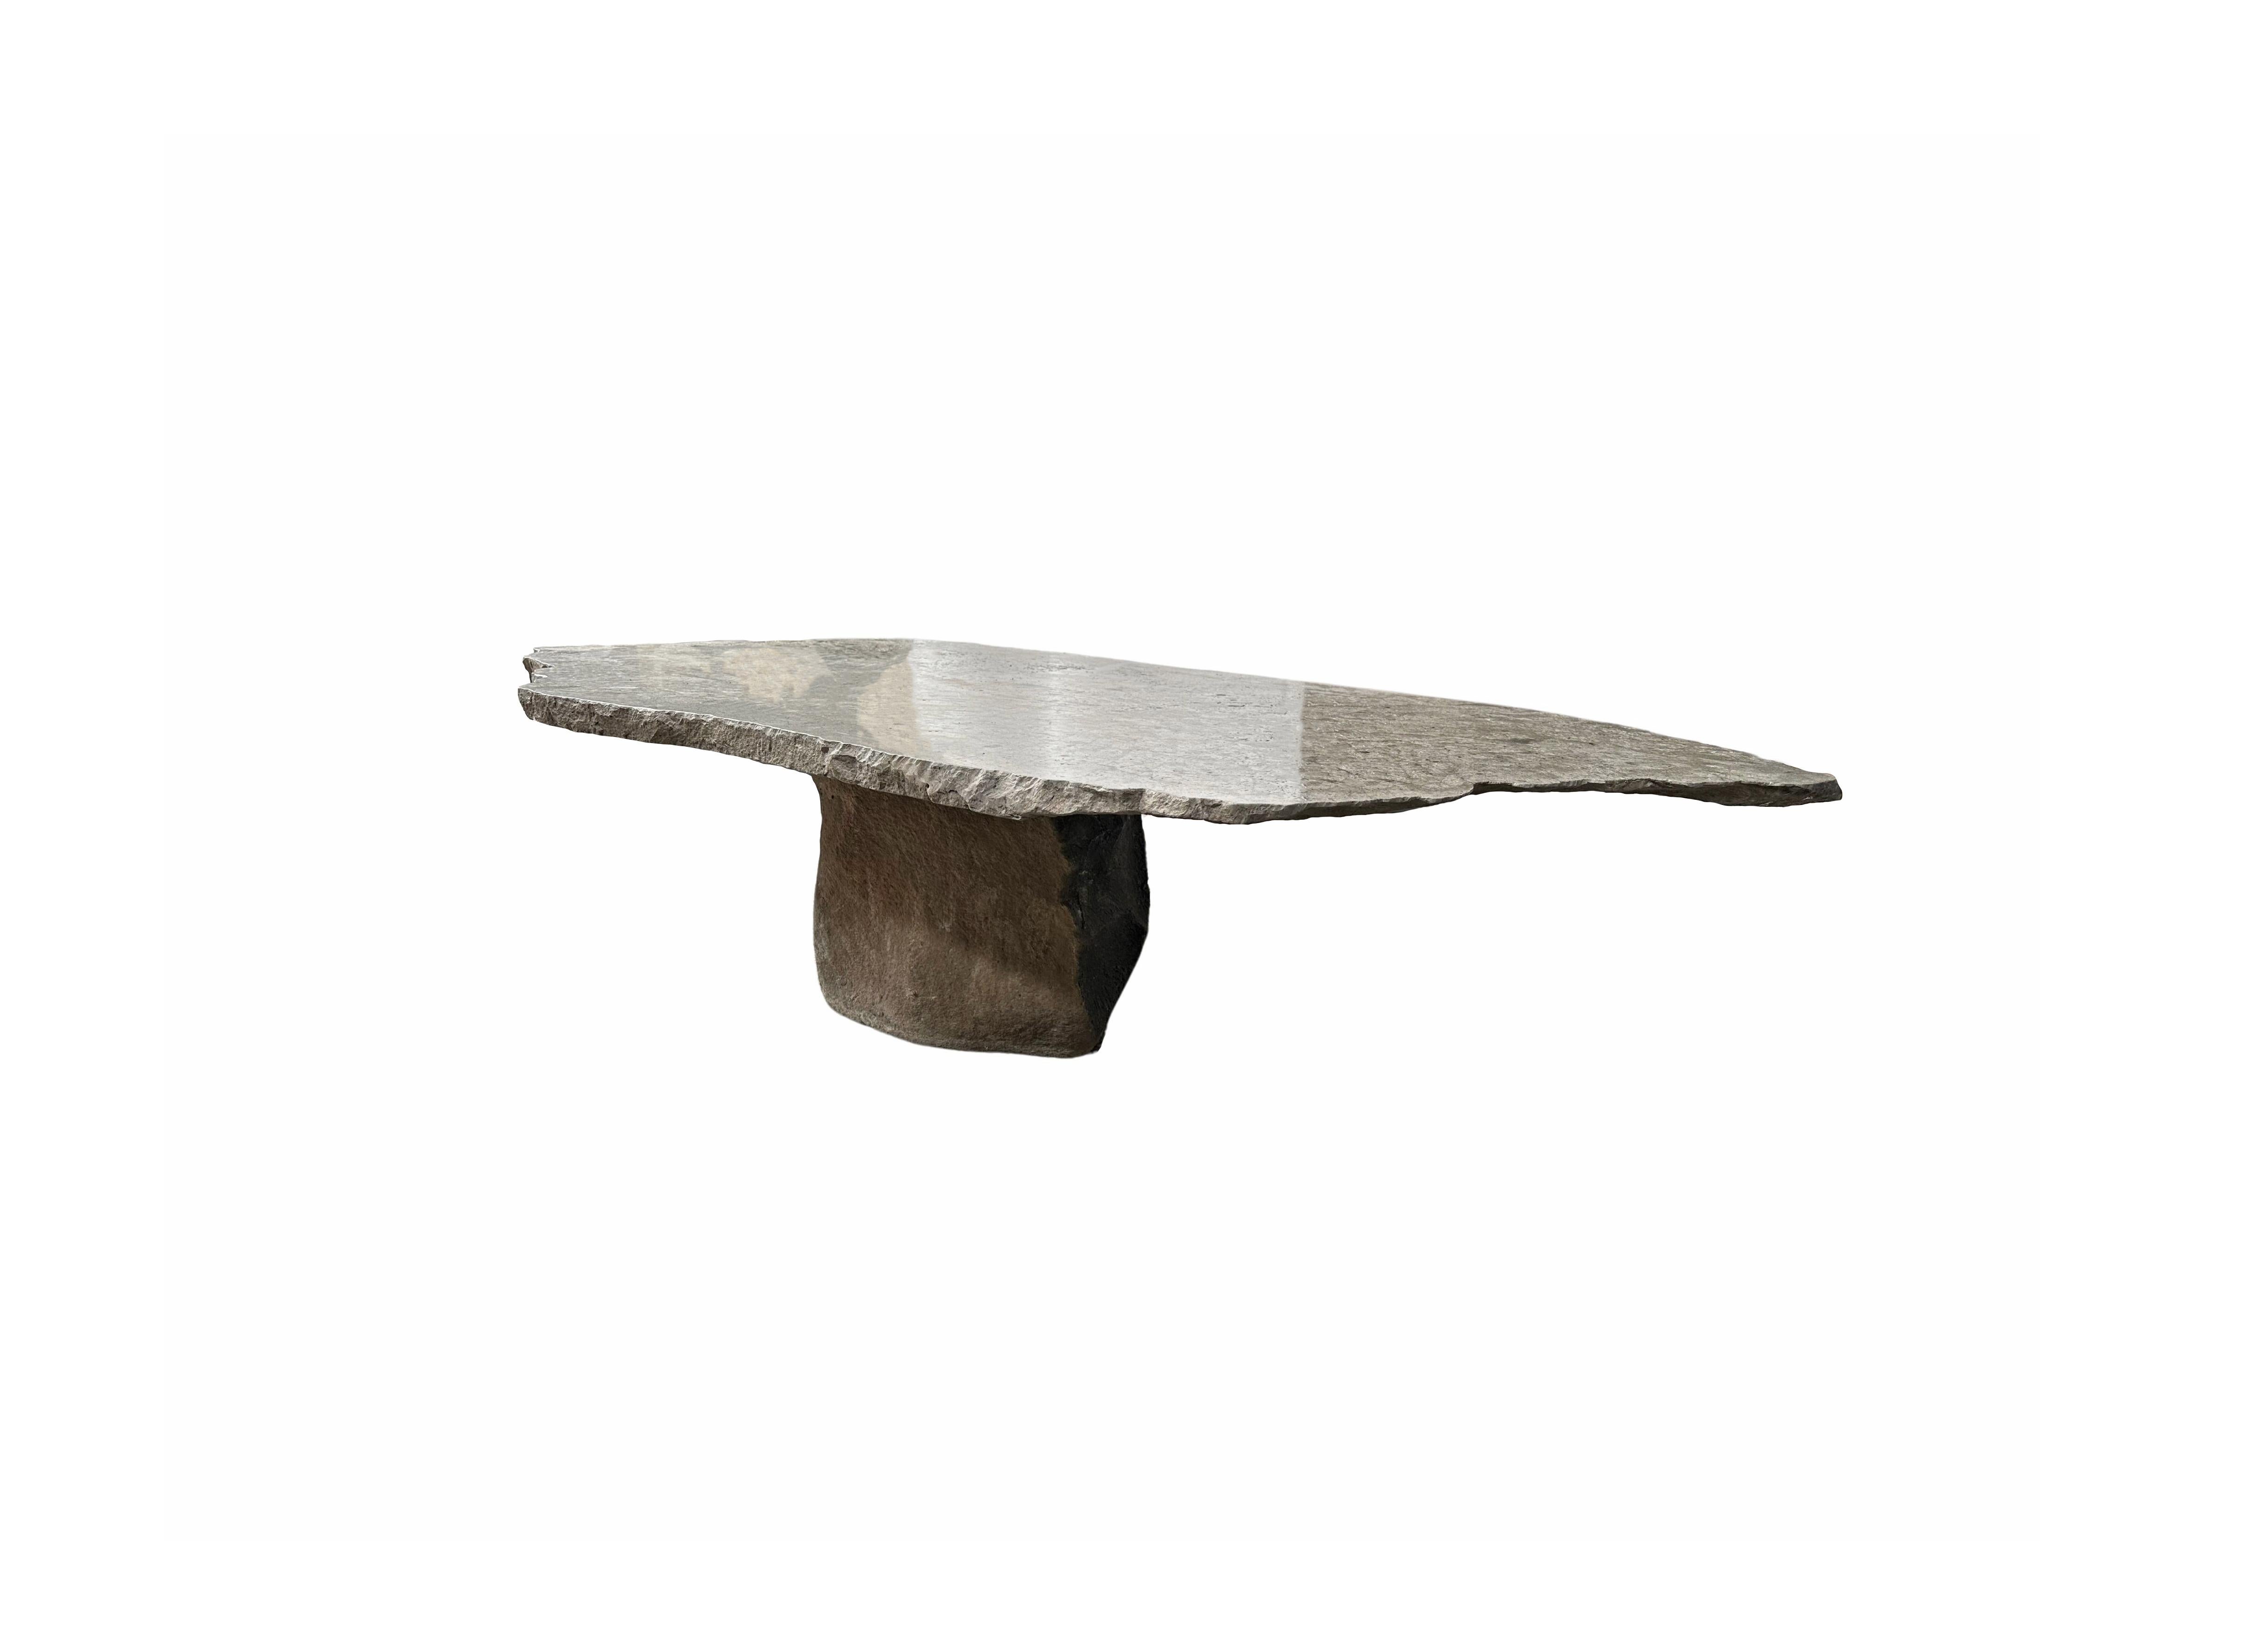 Hand-Crafted Solid Sculptural River Stone Table from Java, Indonesia, Modern Organic